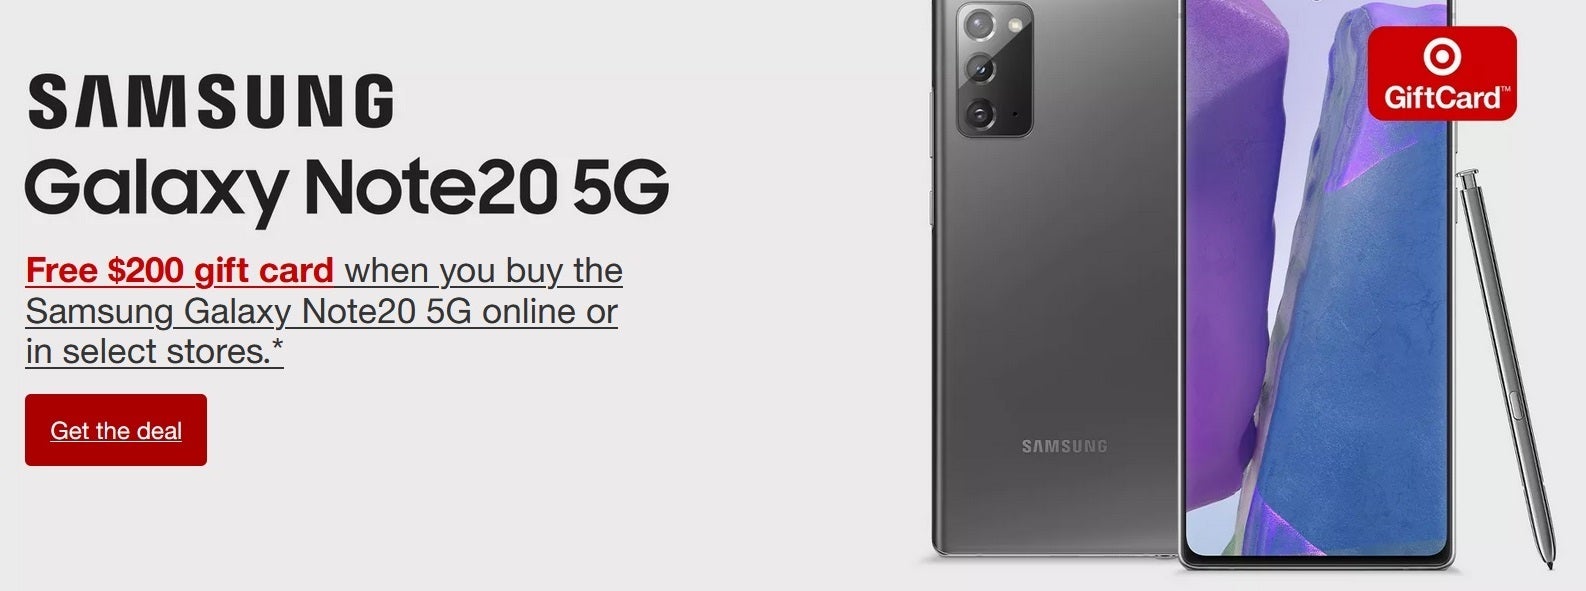 Buy an unlocked Galaxy Note 20 5G from Target and receive a free $200 gift card - Buy an unlocked Galaxy Note 20 5G from Target and score a free $200 gift card